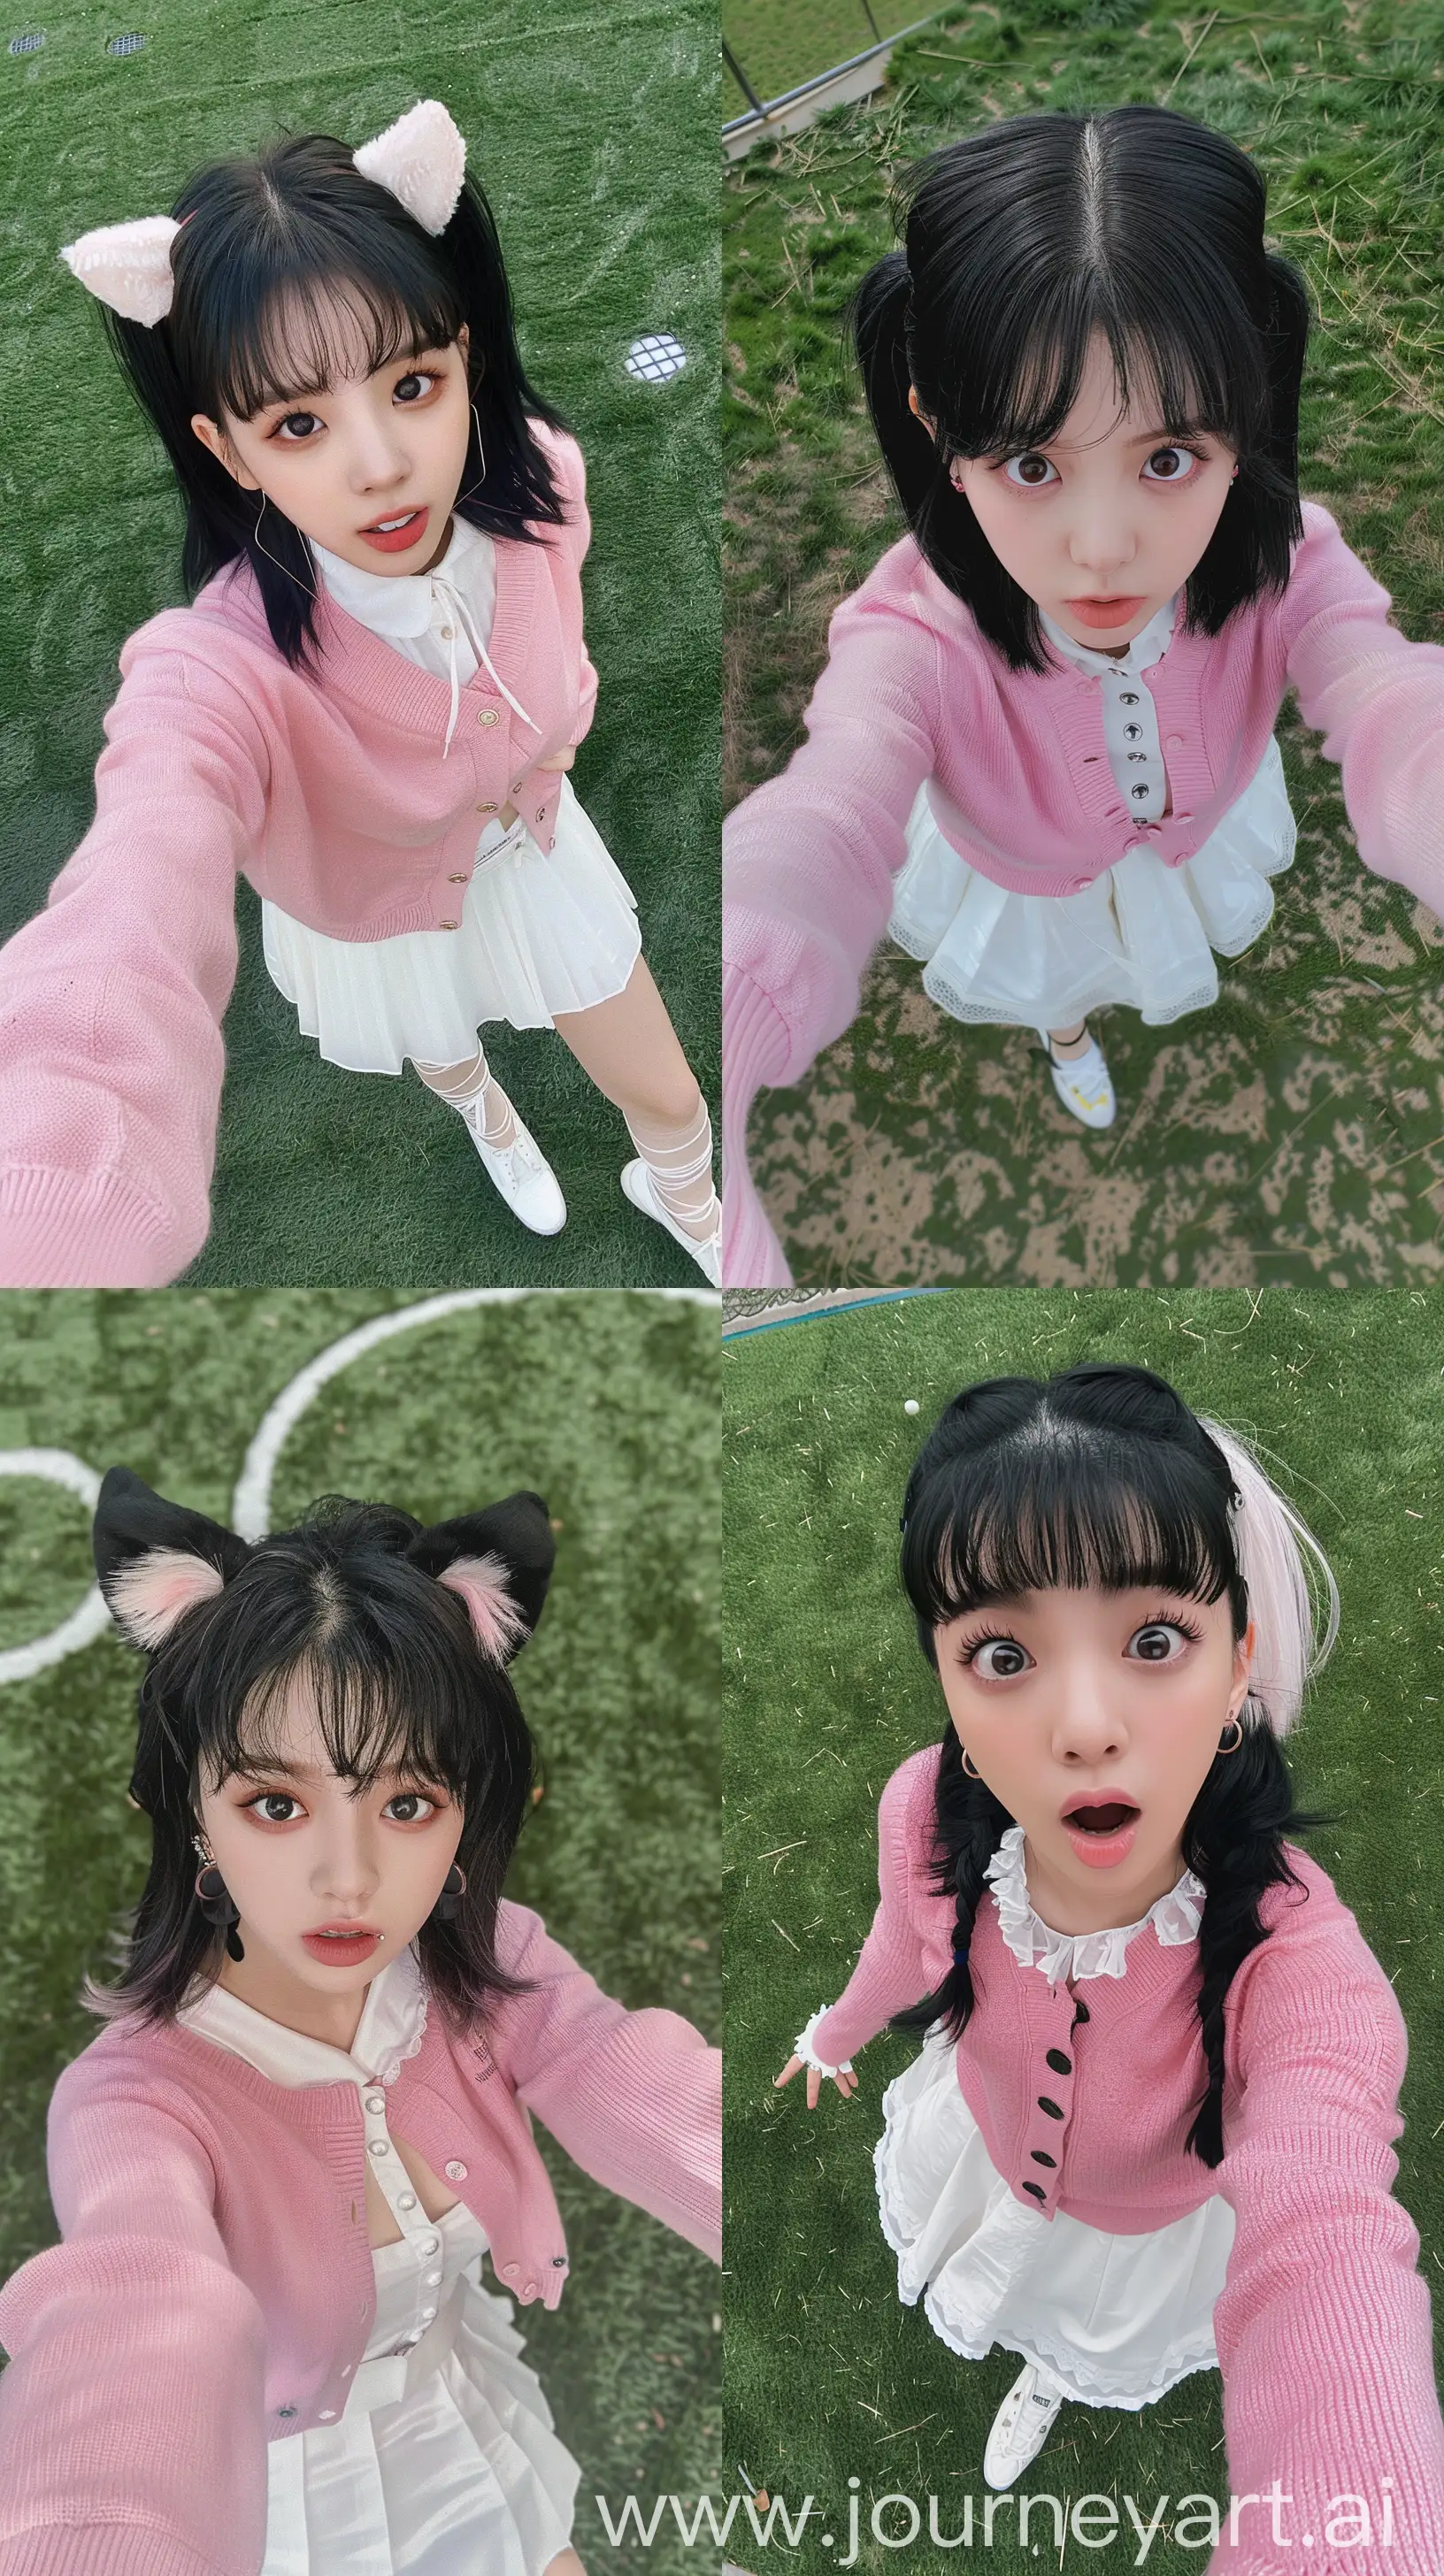 Jennie-Blackpink-Instagram-Aesthetic-Stylish-Selfie-with-Wolfcut-Hair-and-Pink-Outfit